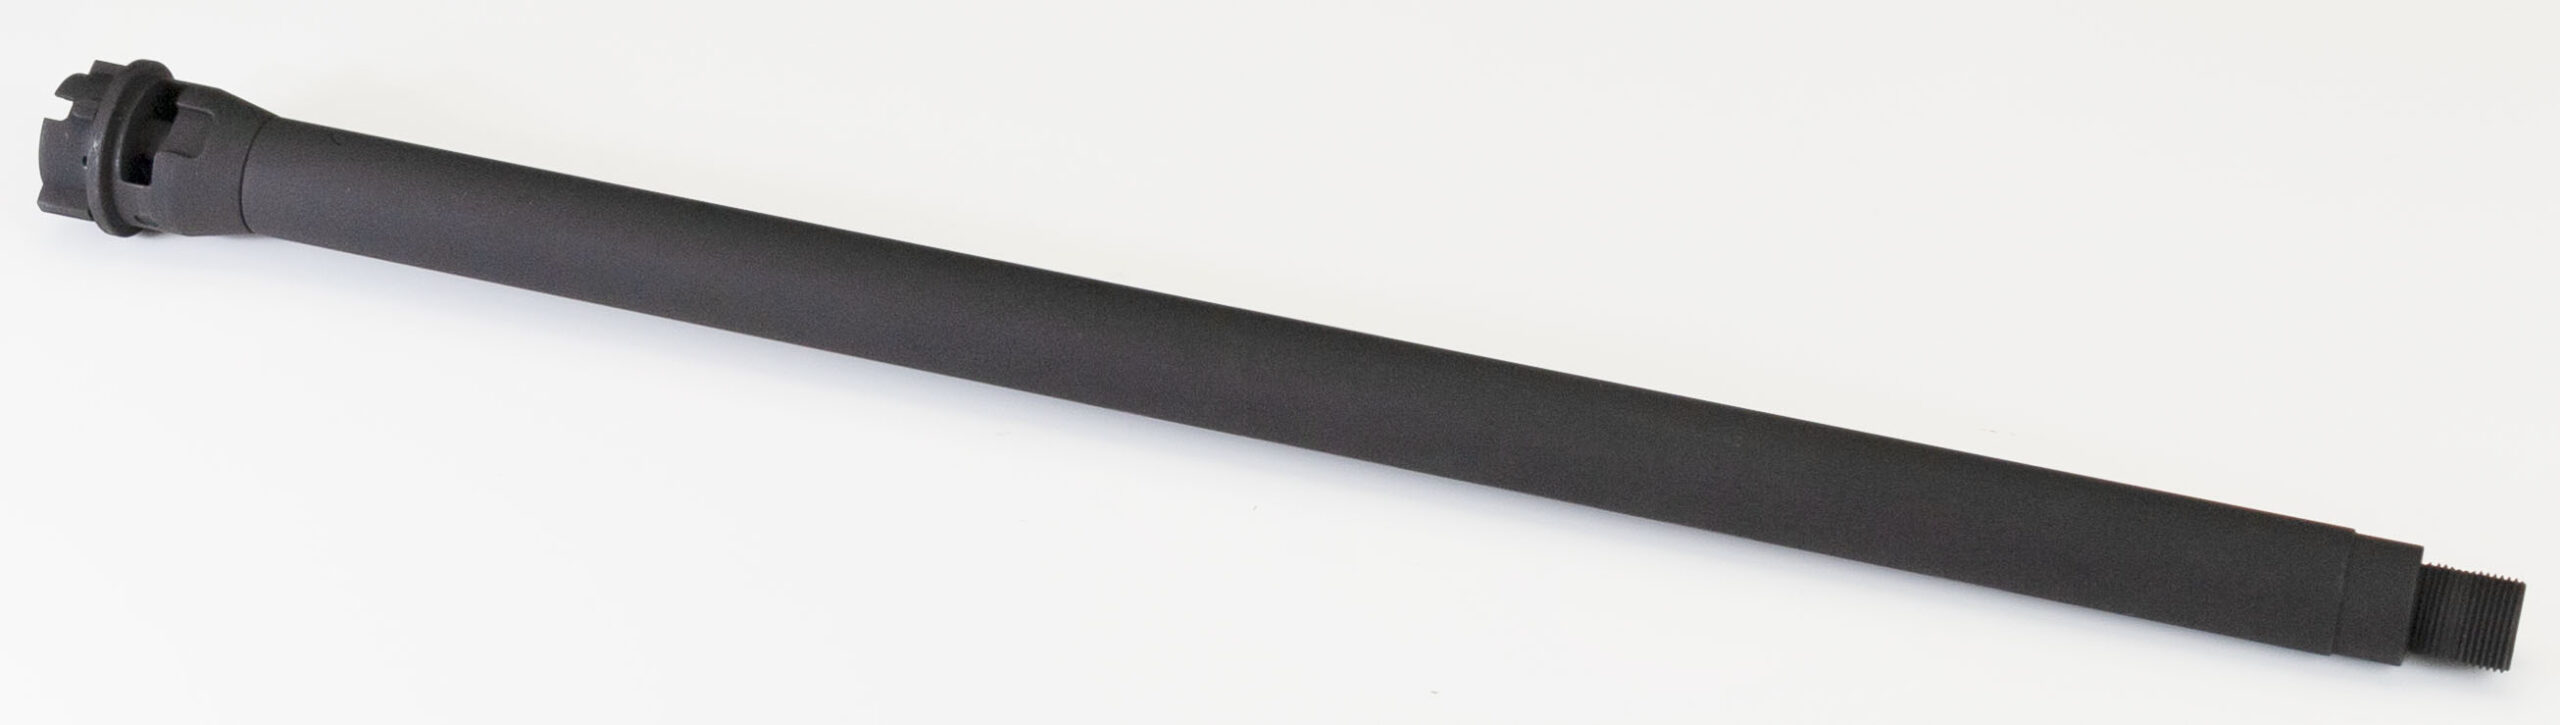 12" Outer Barrel for X1 / GBox series